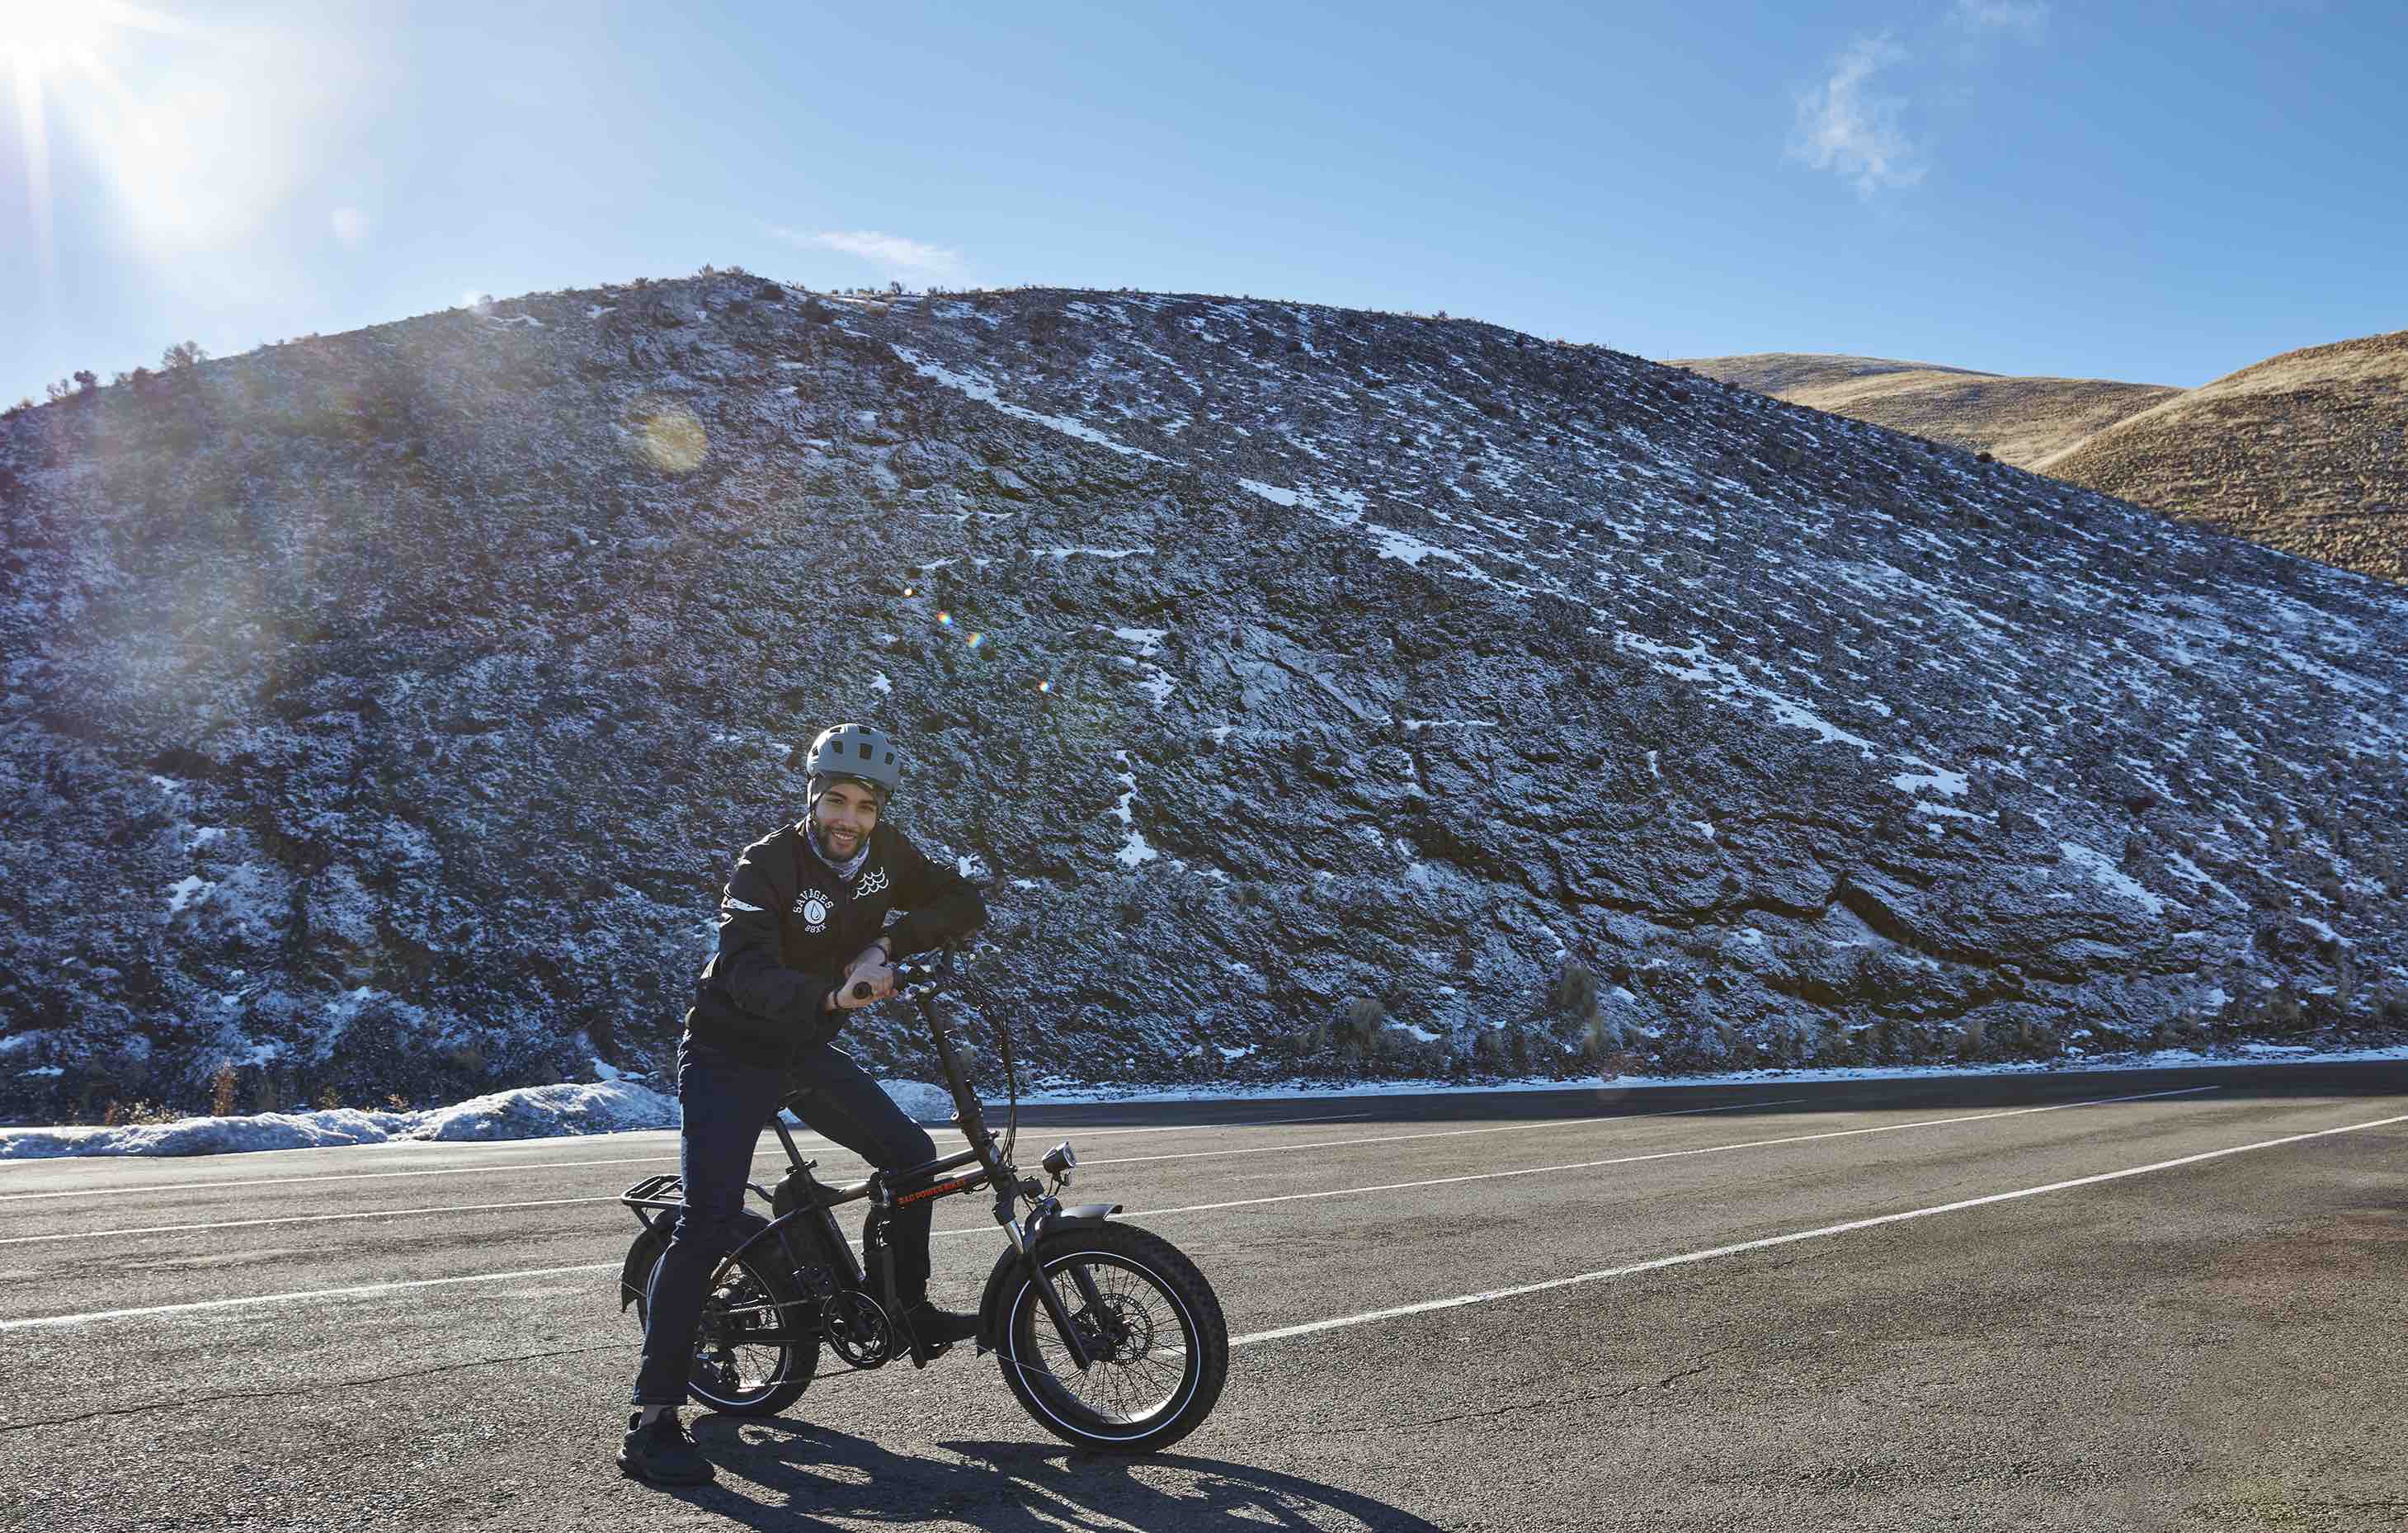 A young man poses with his RadMini on a rural mountain road.